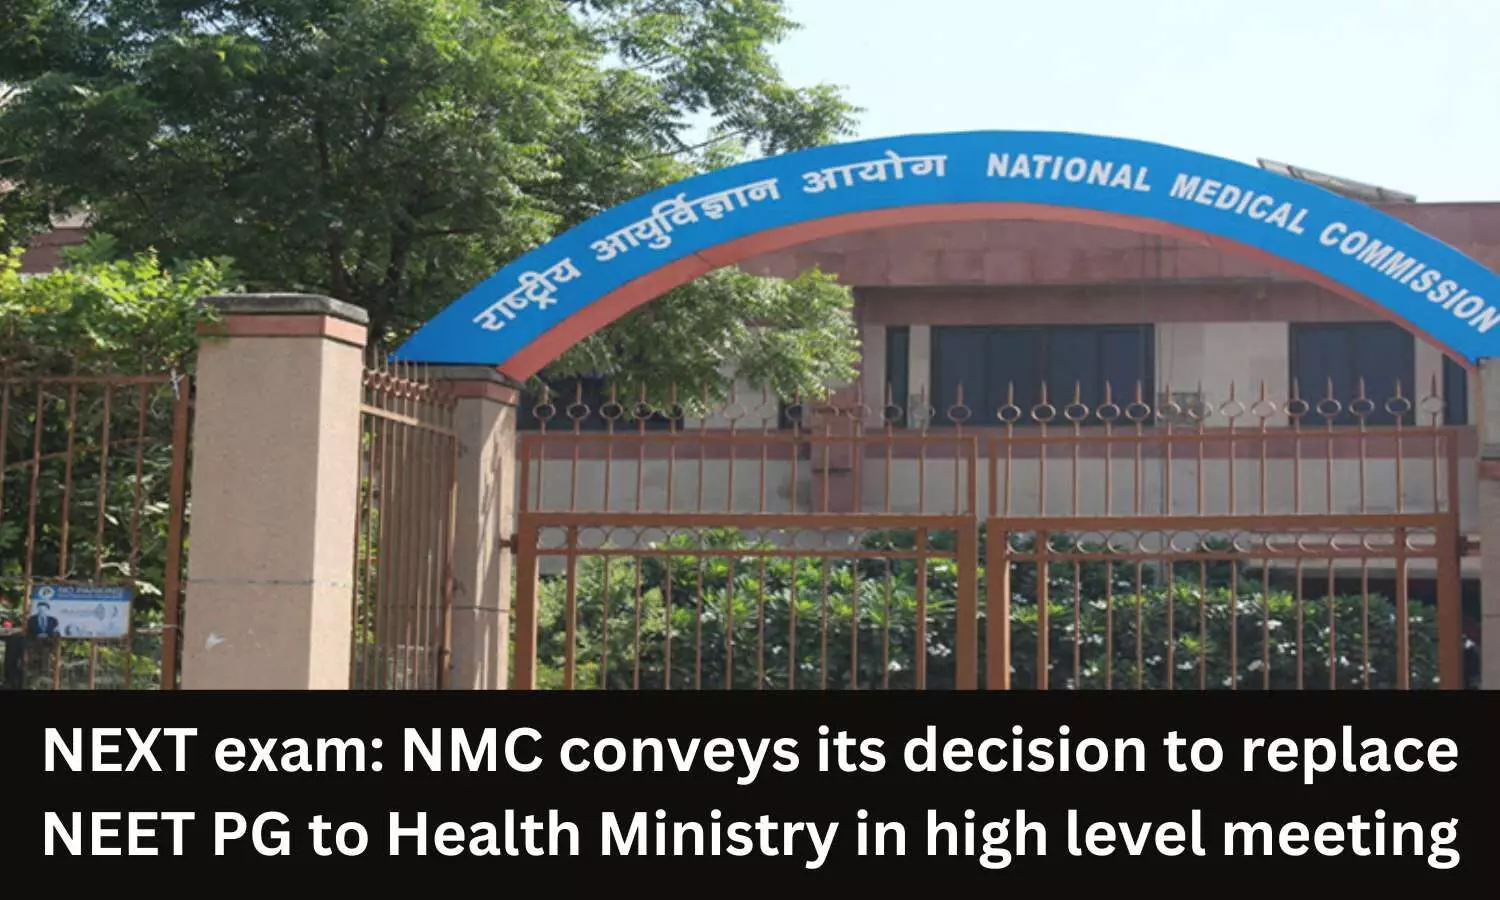 NEXT exam: NMC conveys its decision to replace NEET PG to Health Ministry in high level meeting